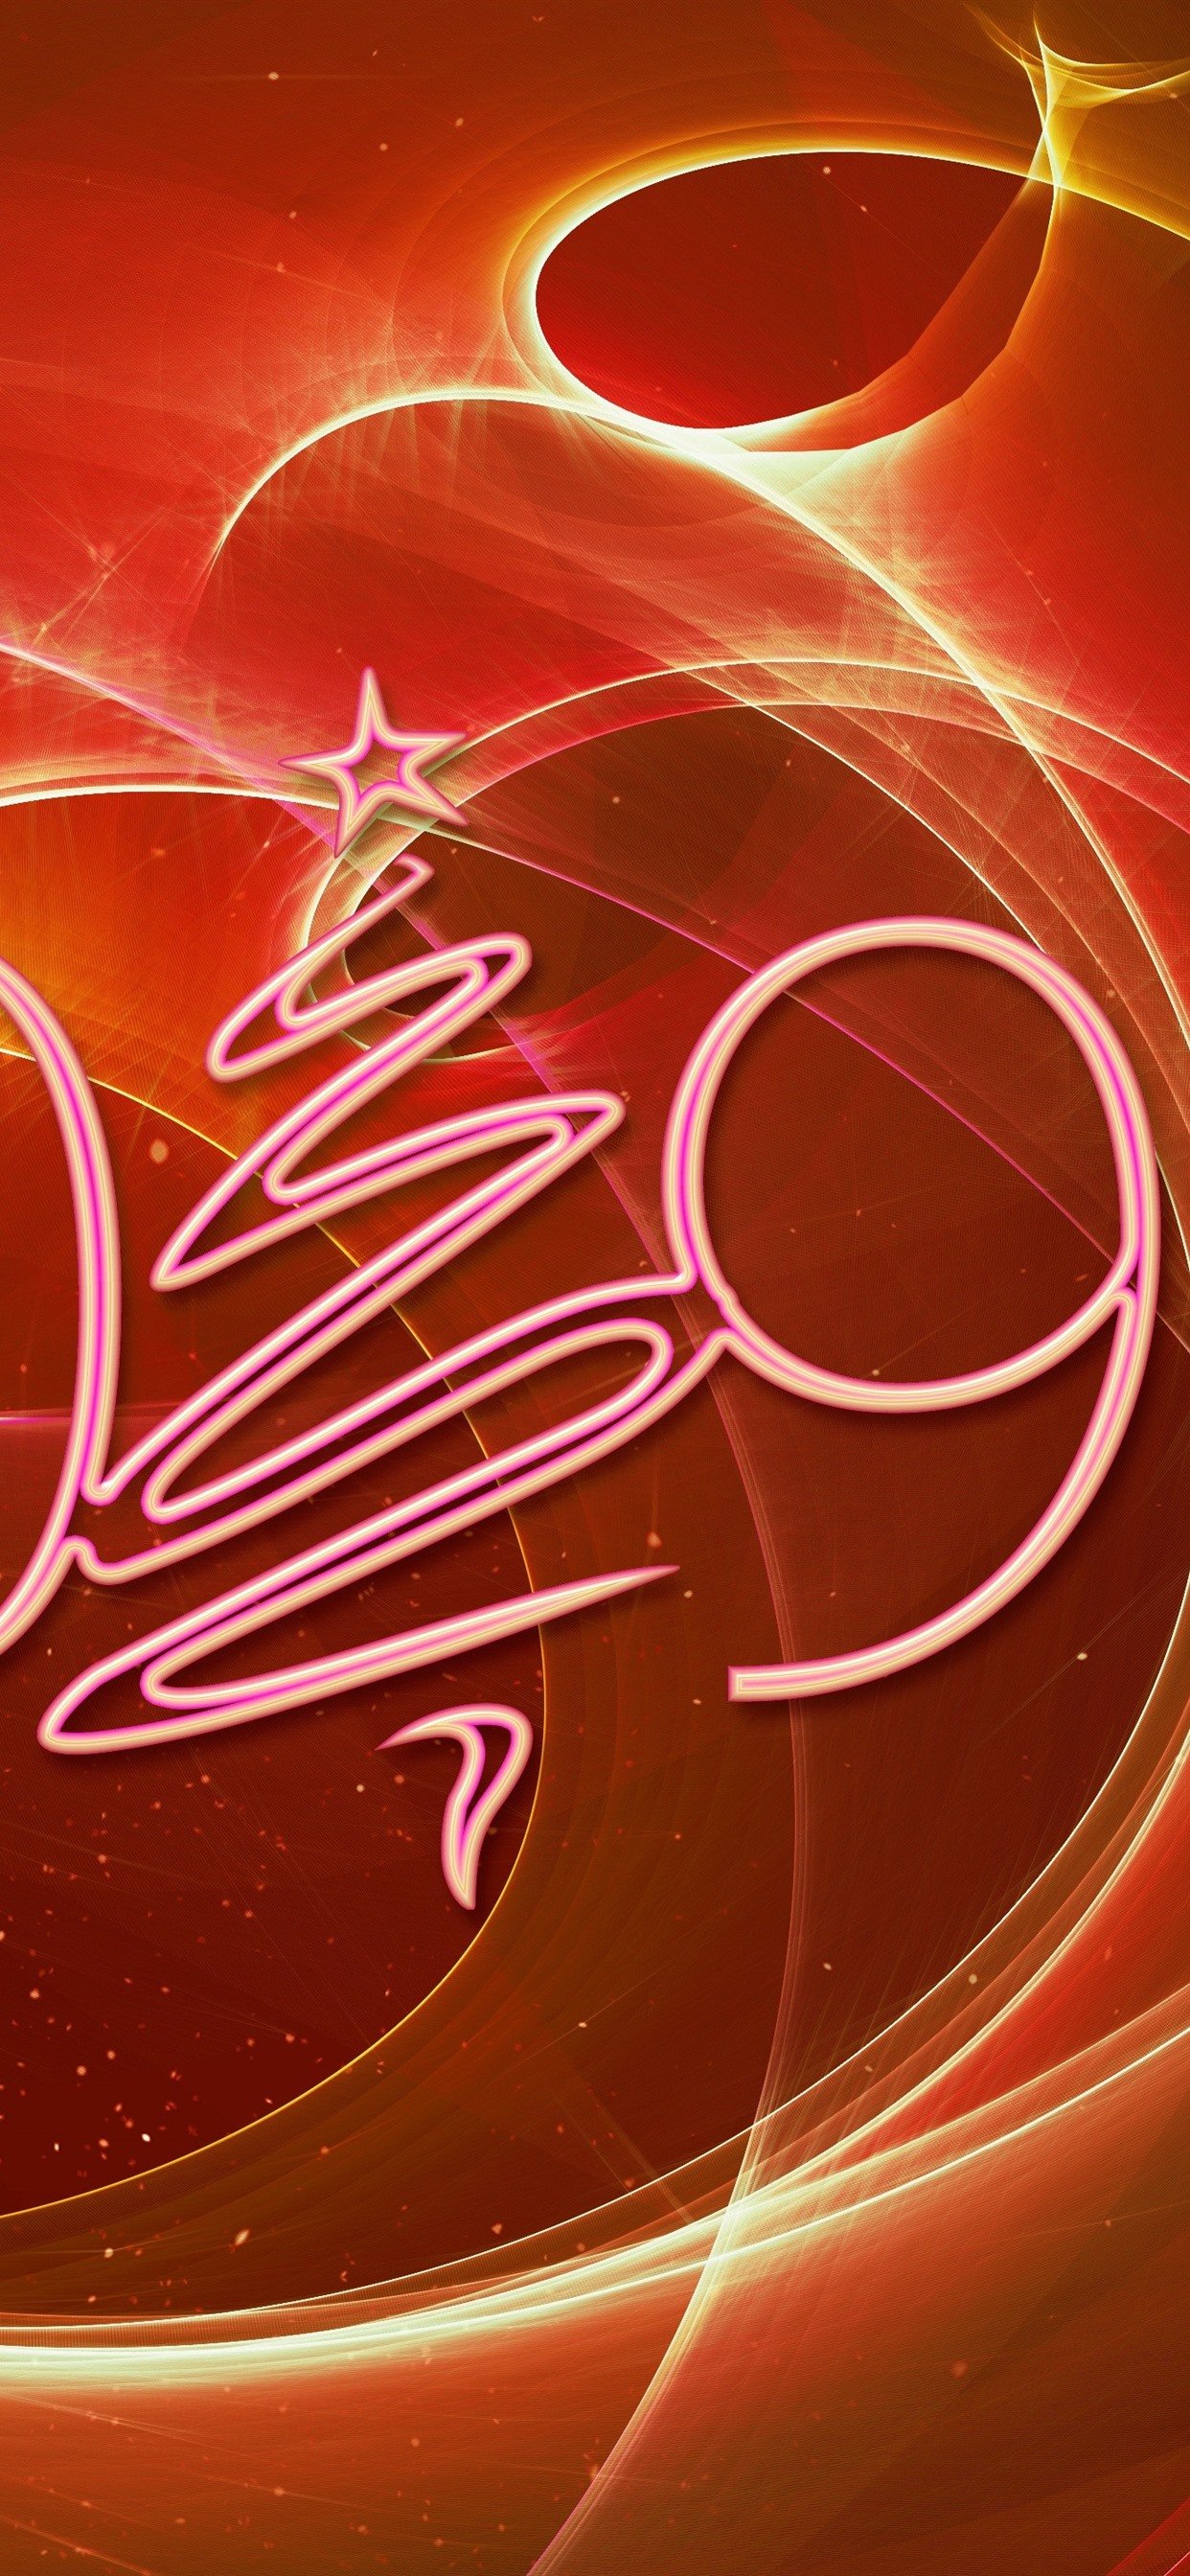 Wallpaper 2019 New Year, Christmas tree, creative design, abstract background 5120x2880 UHD 5K Picture, Image